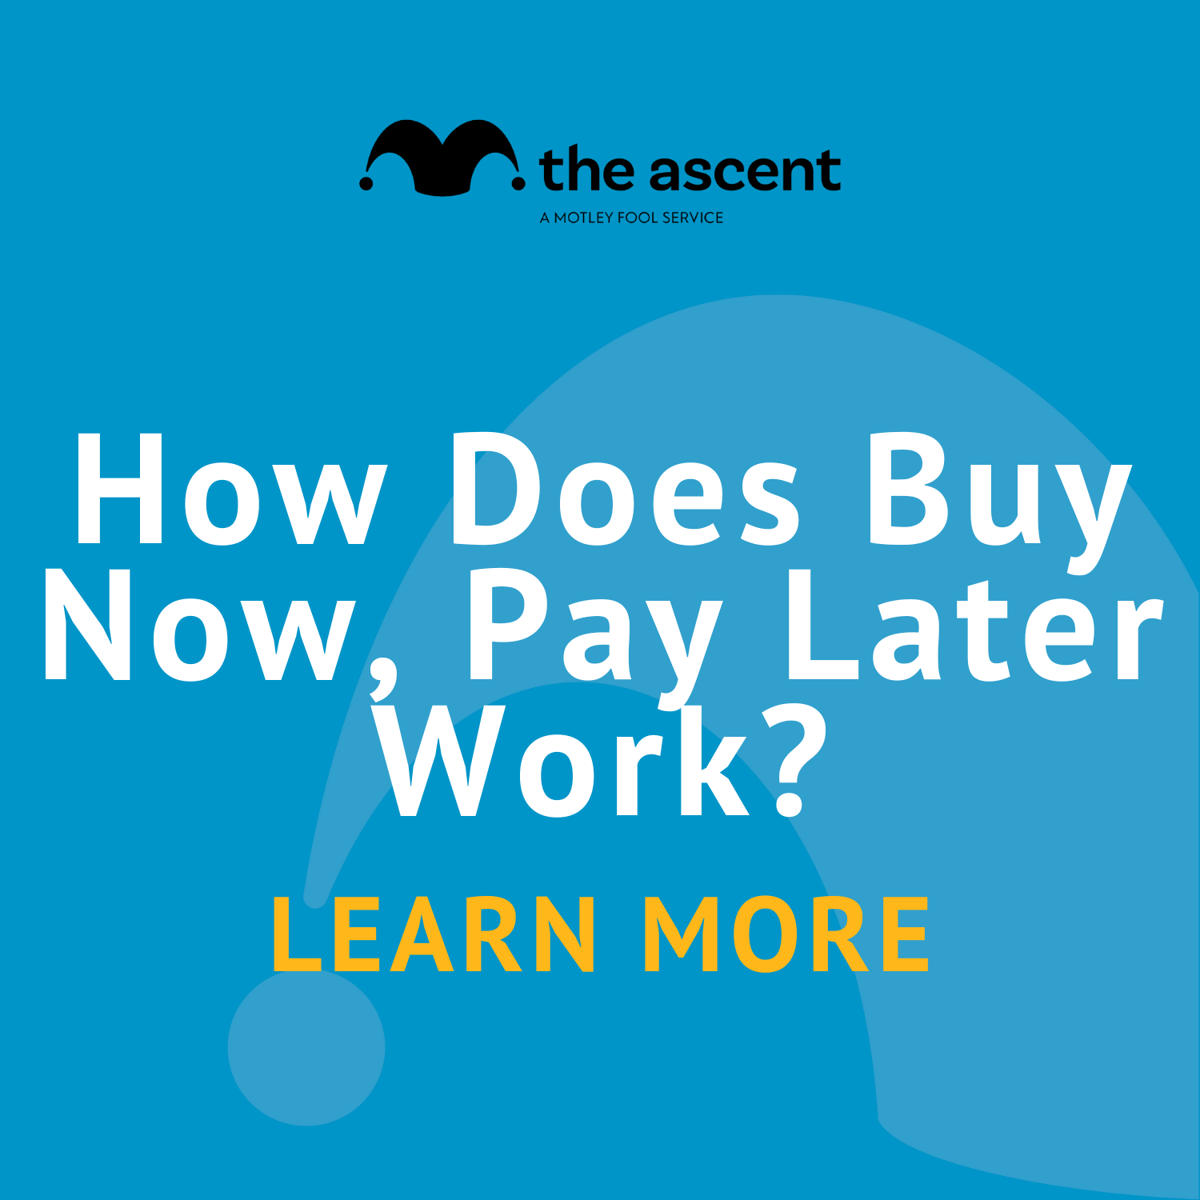 Buy now pay later with Afterpay, Four equal payments